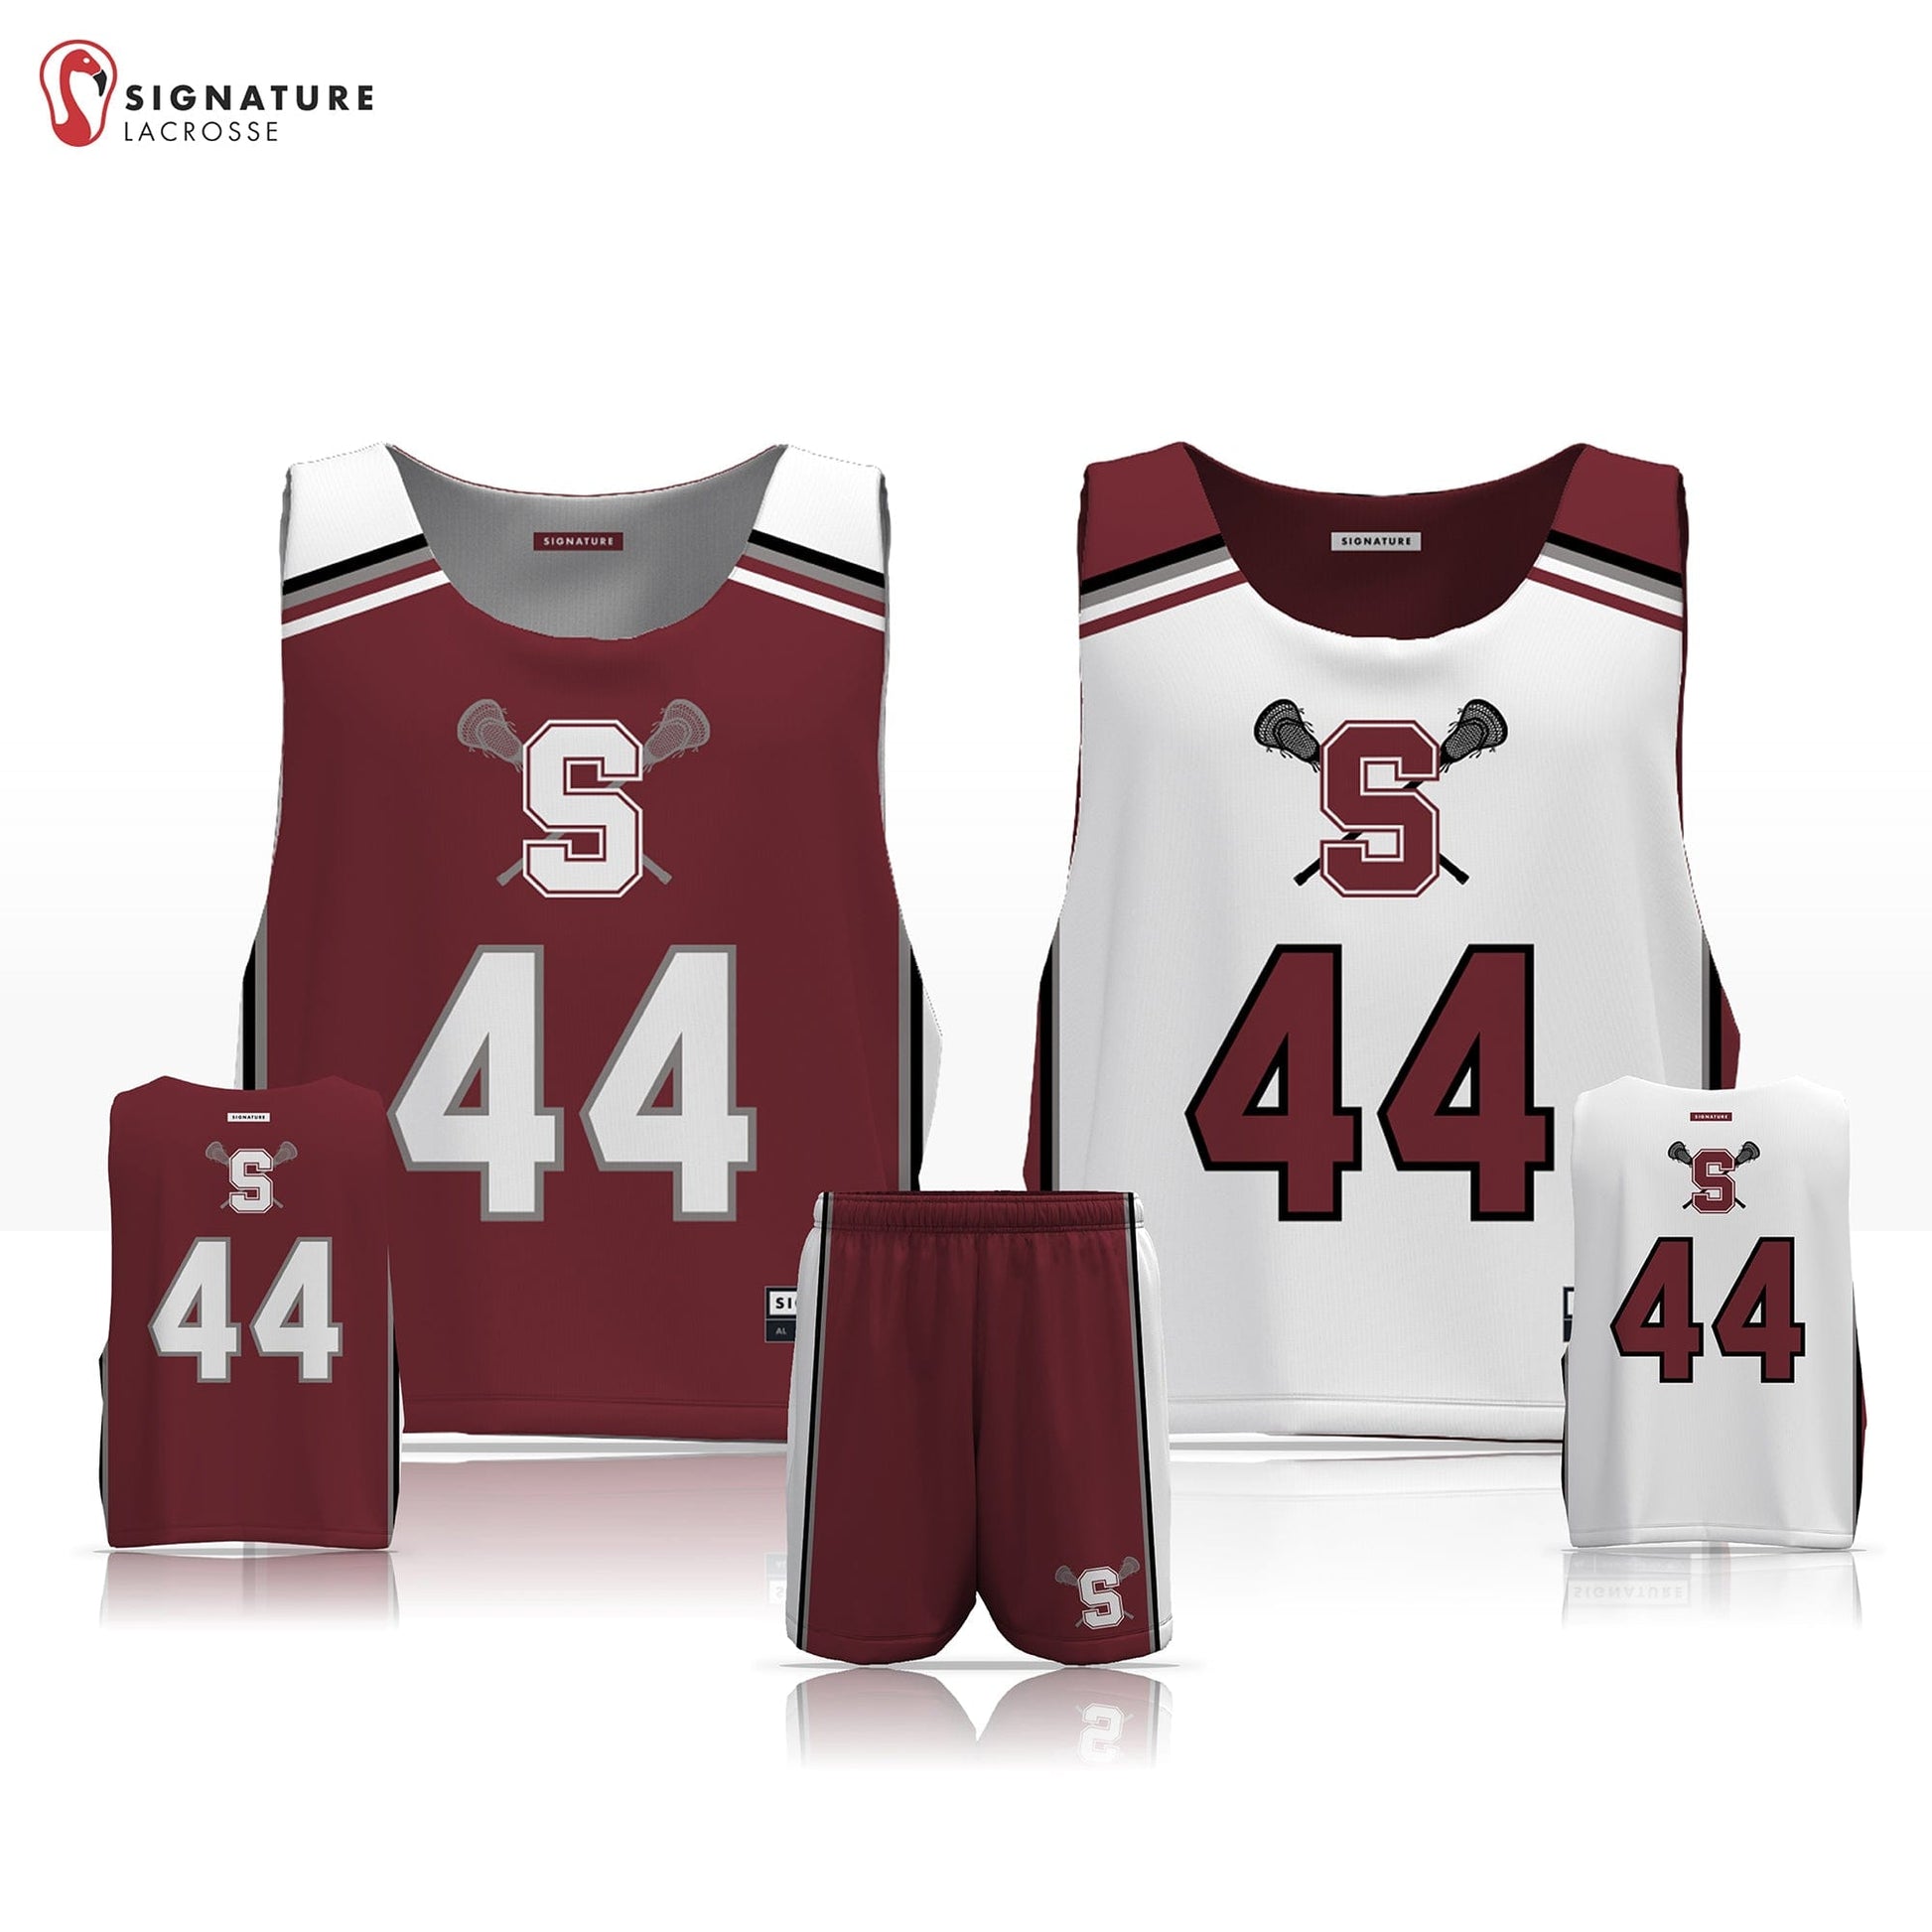 State College Men's 2 Piece Player Game Package: 5-6 Signature Lacrosse